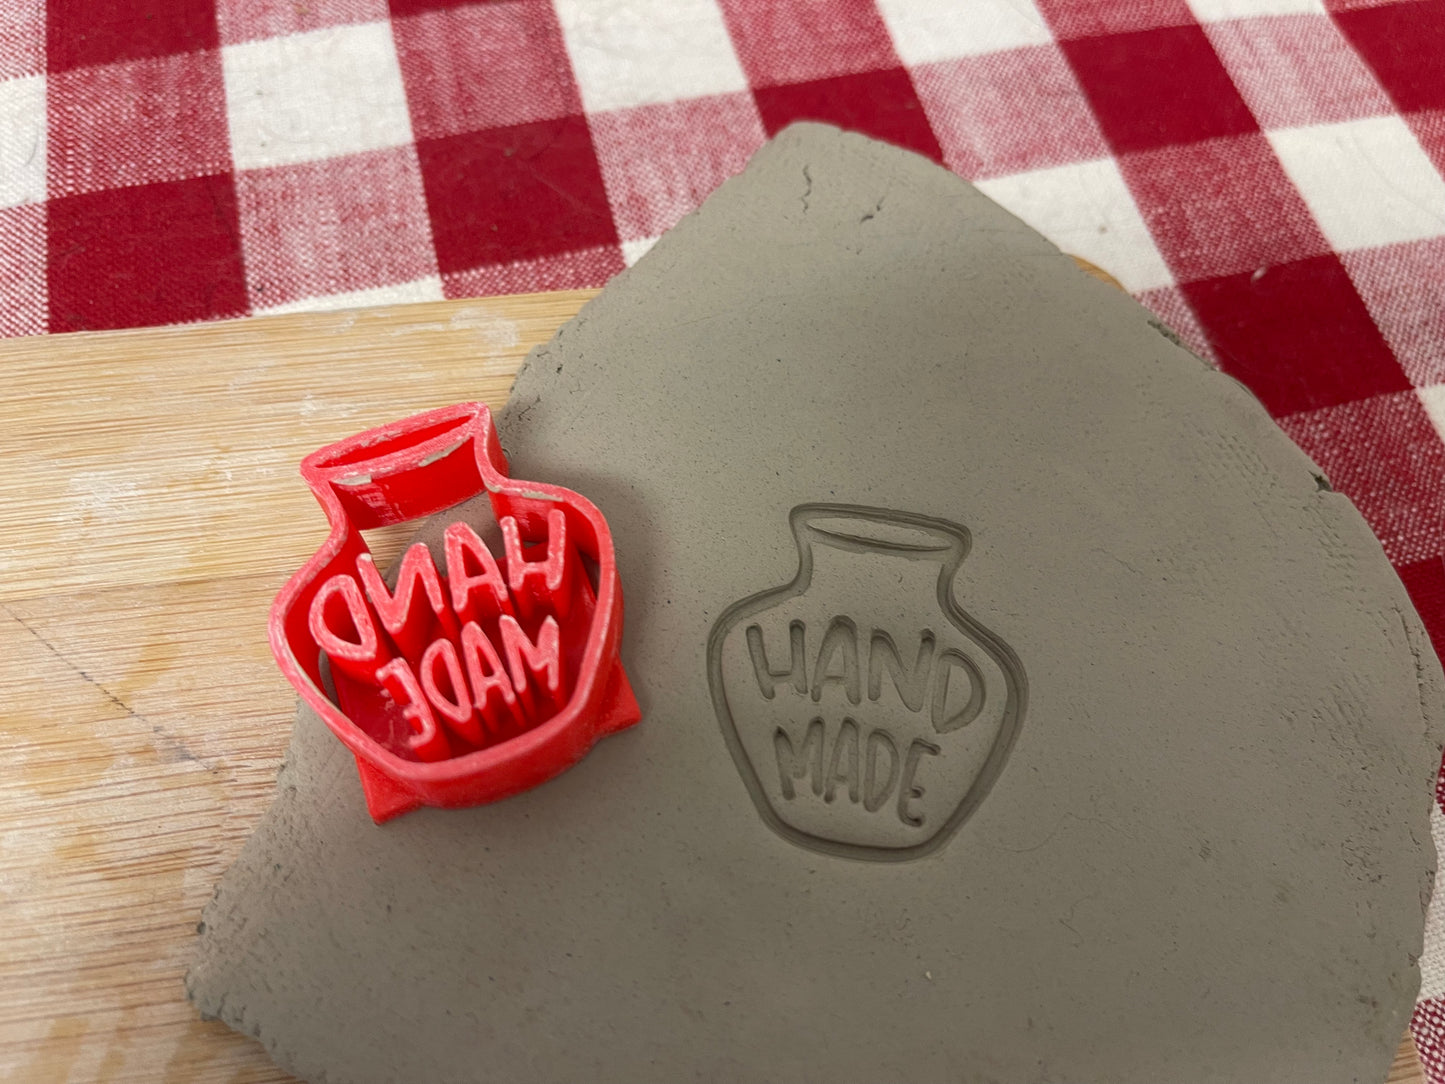 Handmade (on Vase) Pottery Stamp - plastic 3D Printed, Multiple Sizes Available